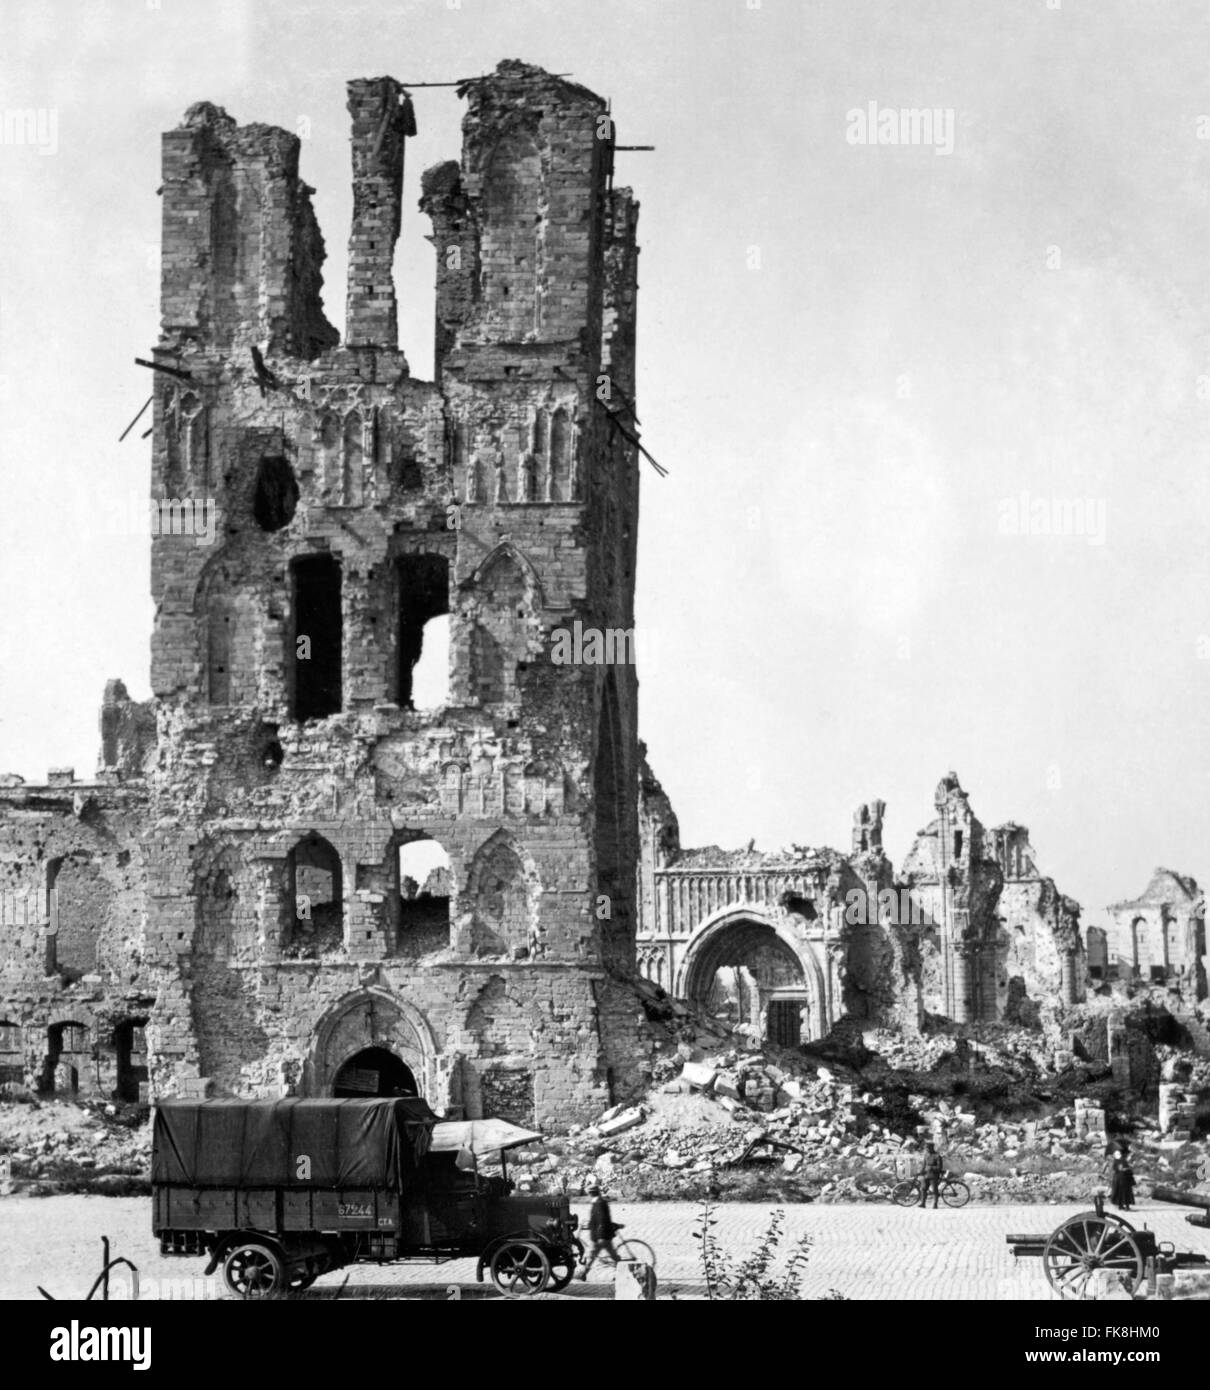 Ruins of the cathedral at Ypres with a British army truck in the foreground, Flanders, Belgium in World War I. Photo taken between 1914 and 1918 Stock Photo